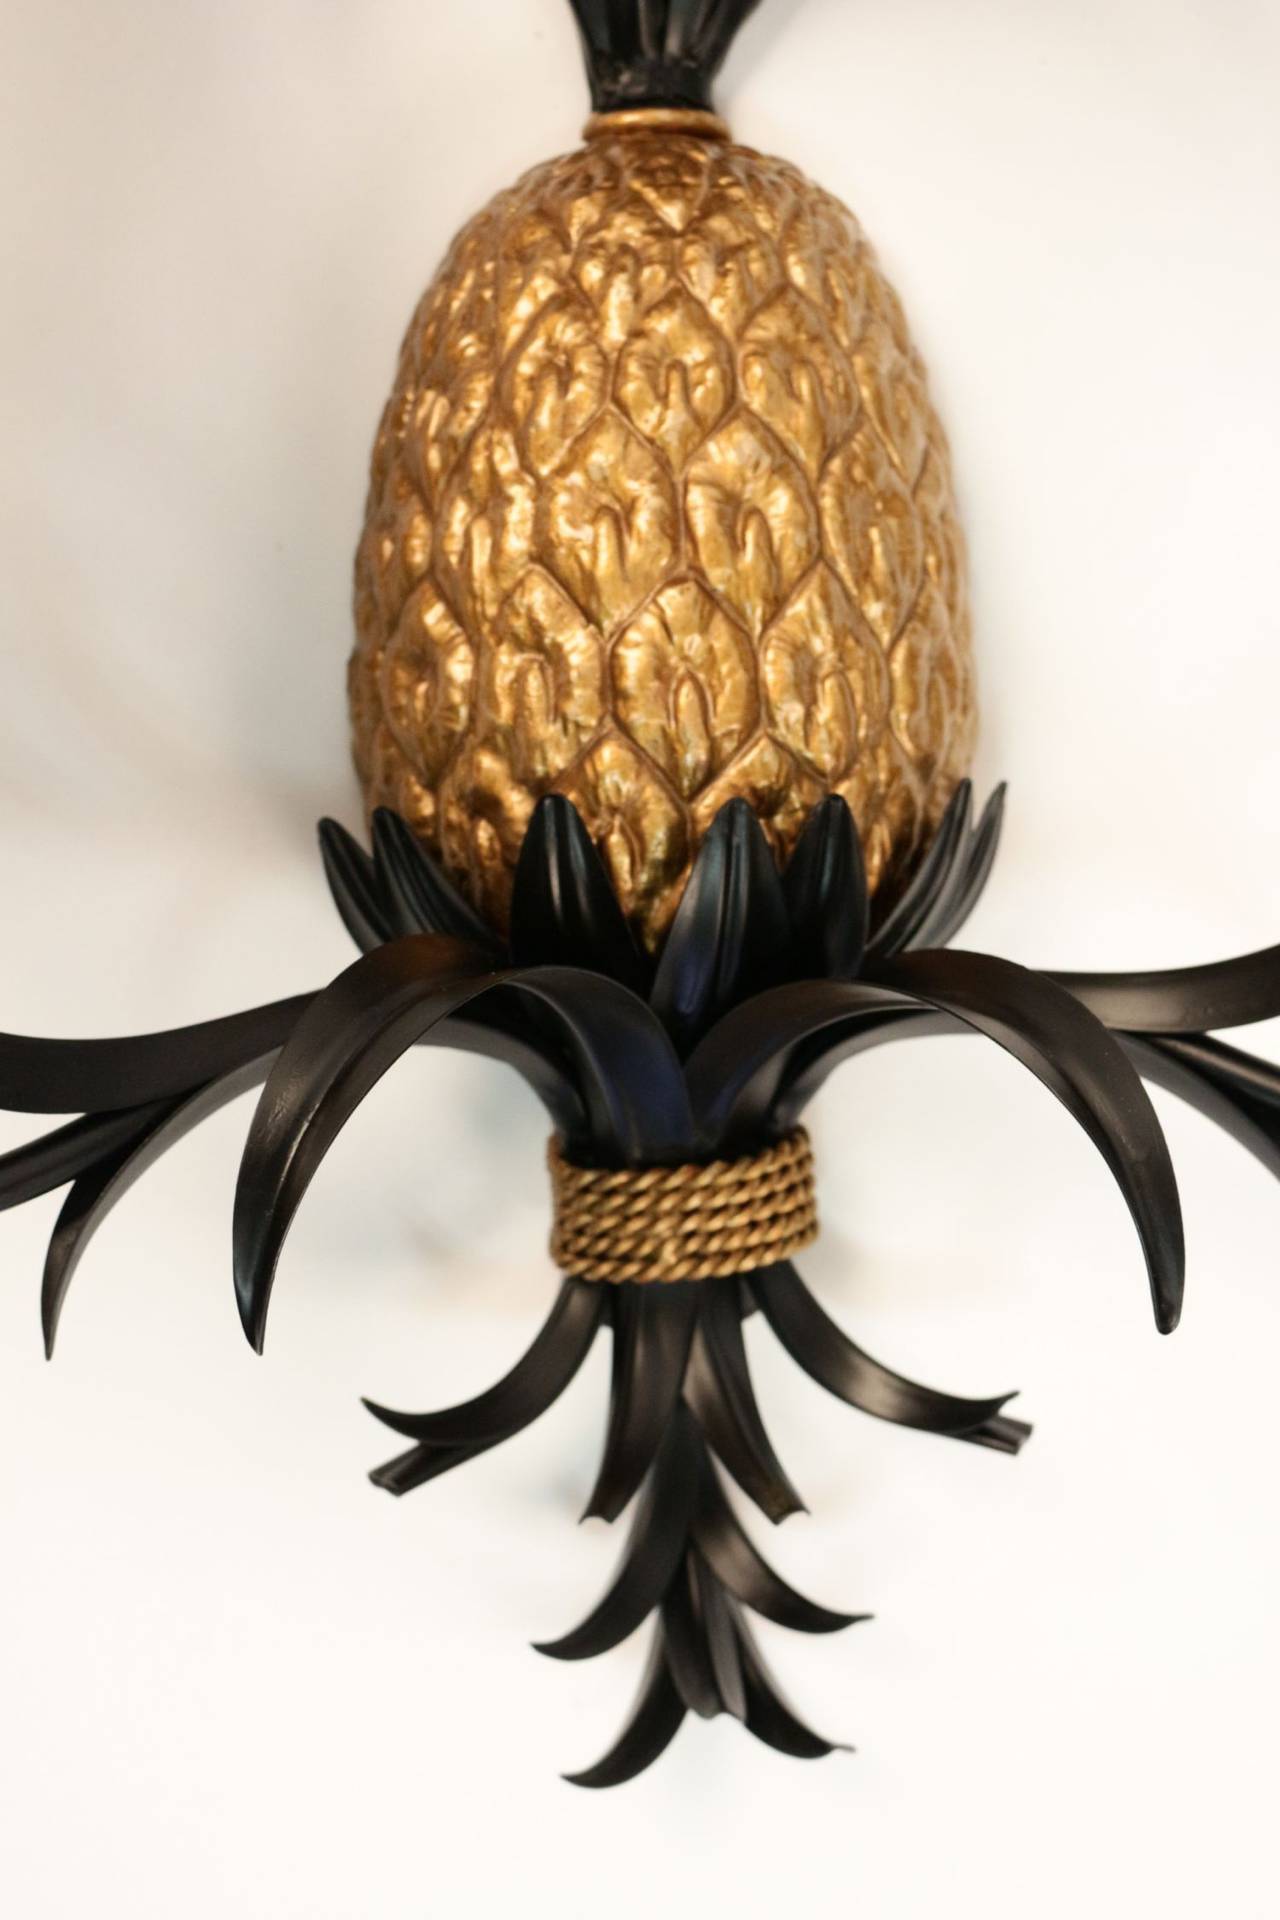 Pair of large 1970s sconces 'The Pineapples' by Maison FlorArt.

The pineapple is in gilt earthenware, the foliage in blackened sheet metal.
Two lighted arms surmounted by tailored lampshades with gold color inside and black outside.